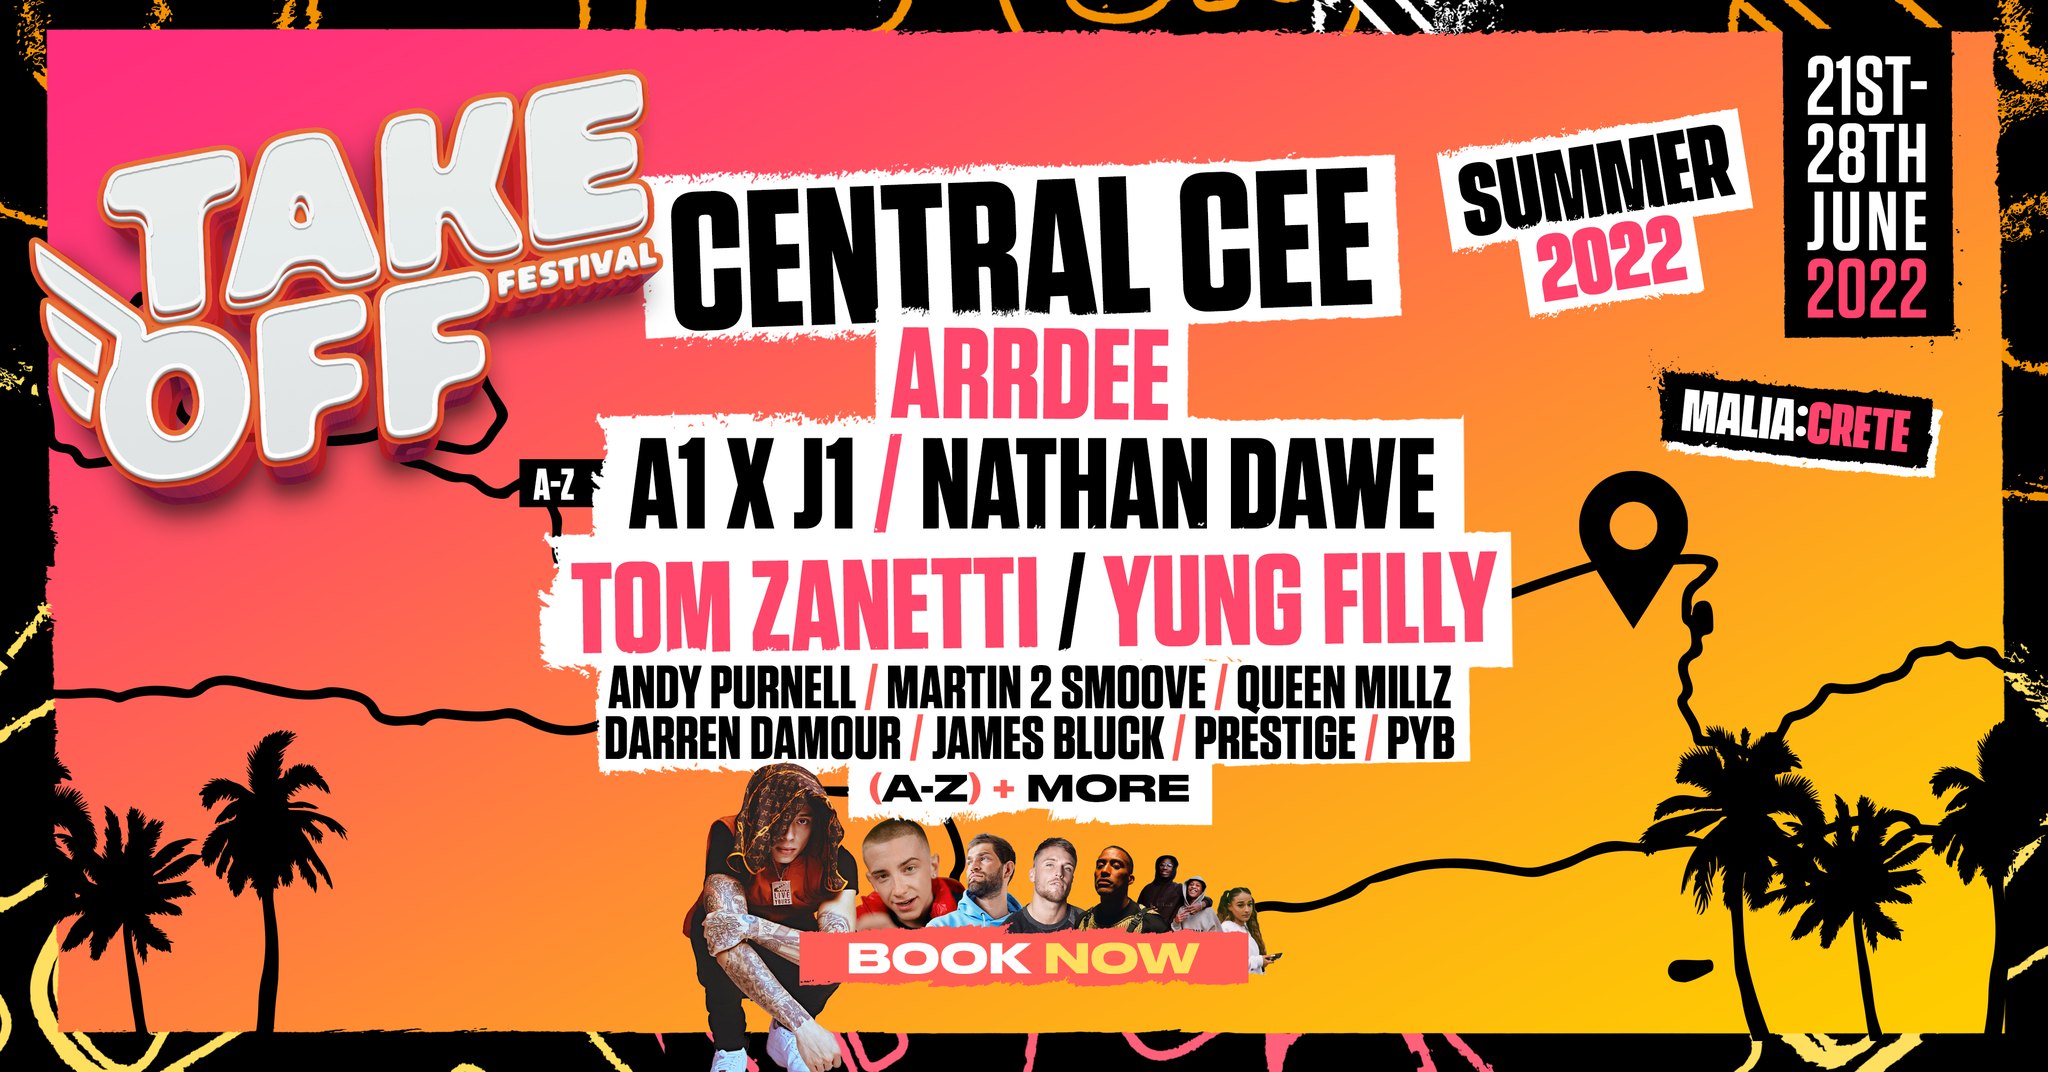 Take Off Festival 2022  ✈️  – Malia, Crete  |  ft Central Cee, Arrdee, Yung Filly, Nathan Dawe & More!